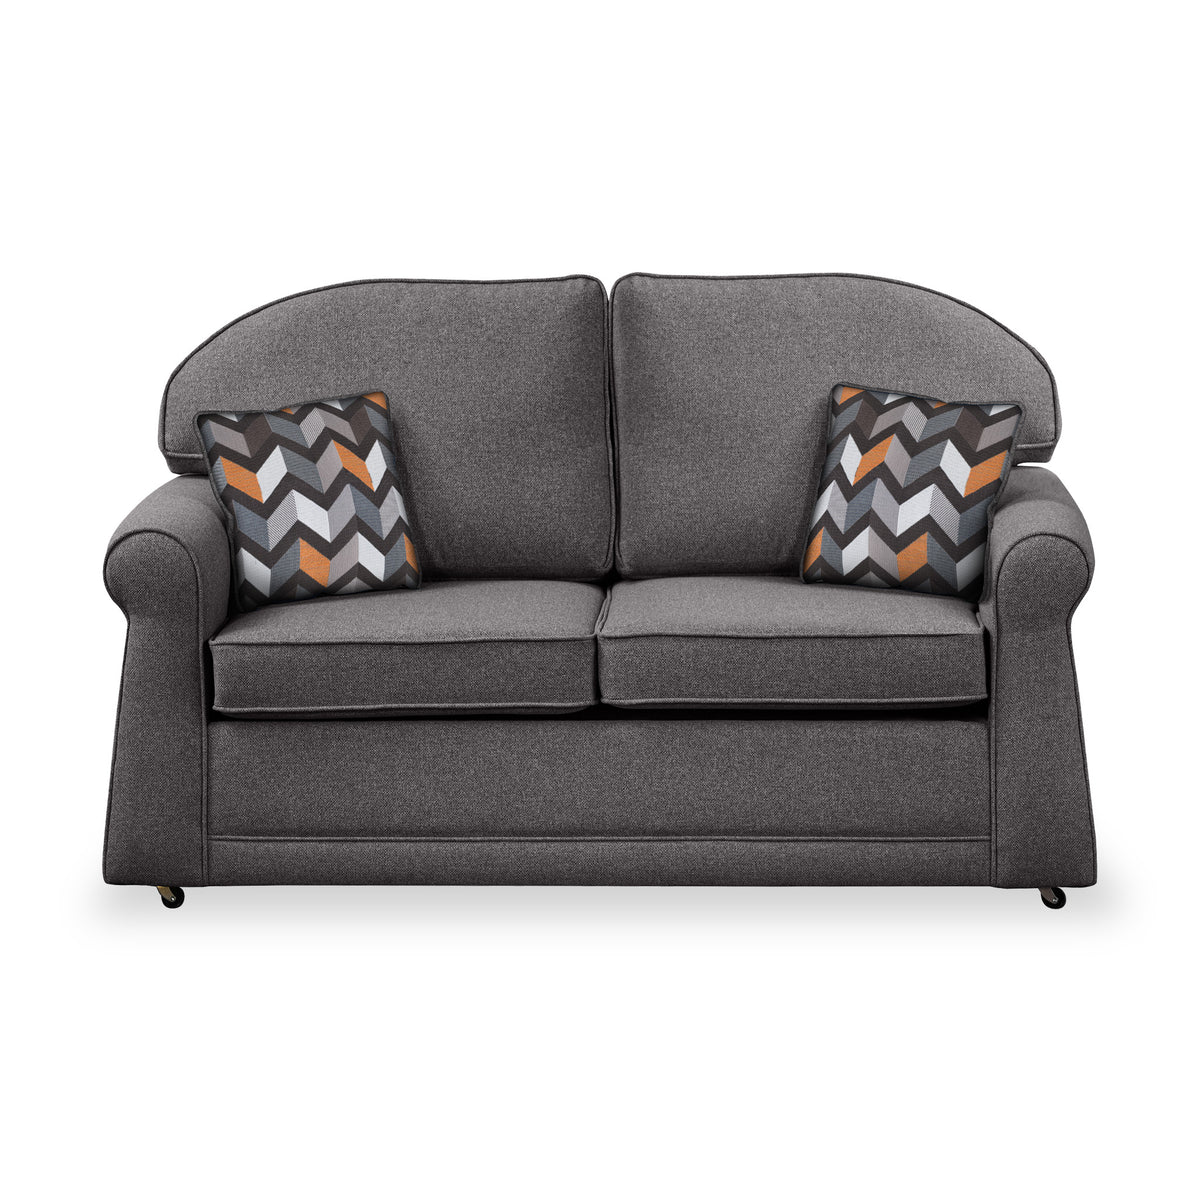 Giselle Charcoal Soft Weave 2 Seater Sofabed with Charcoal Scatter Cushions from Roseland Furniture